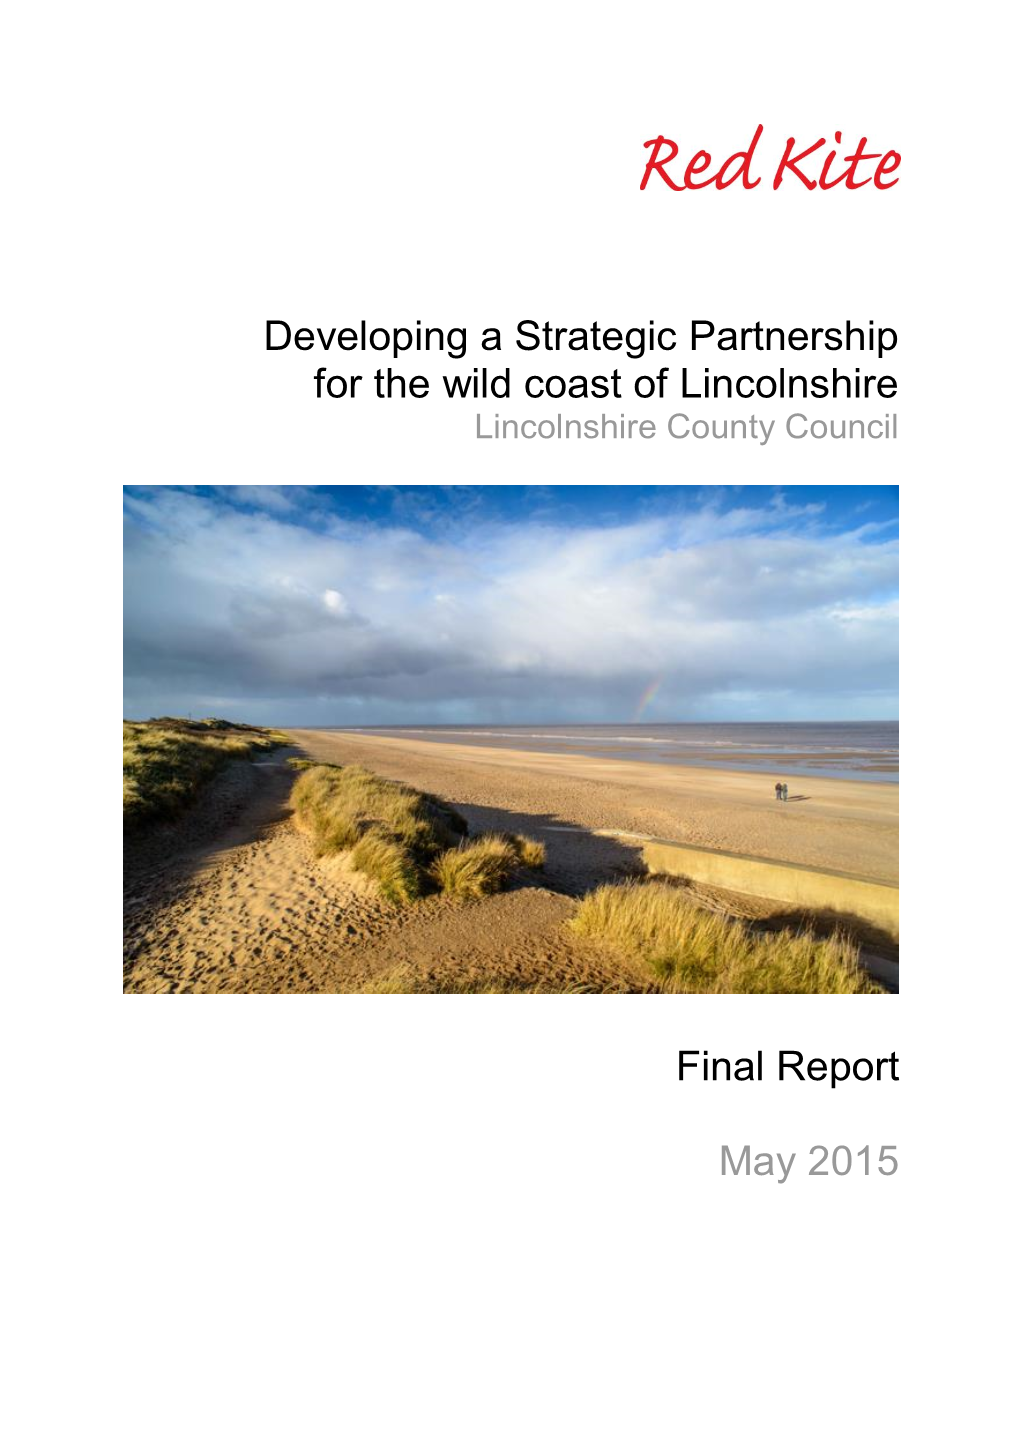 Developing a Strategic Partnership for the Wild Coast of Lincolnshire Final